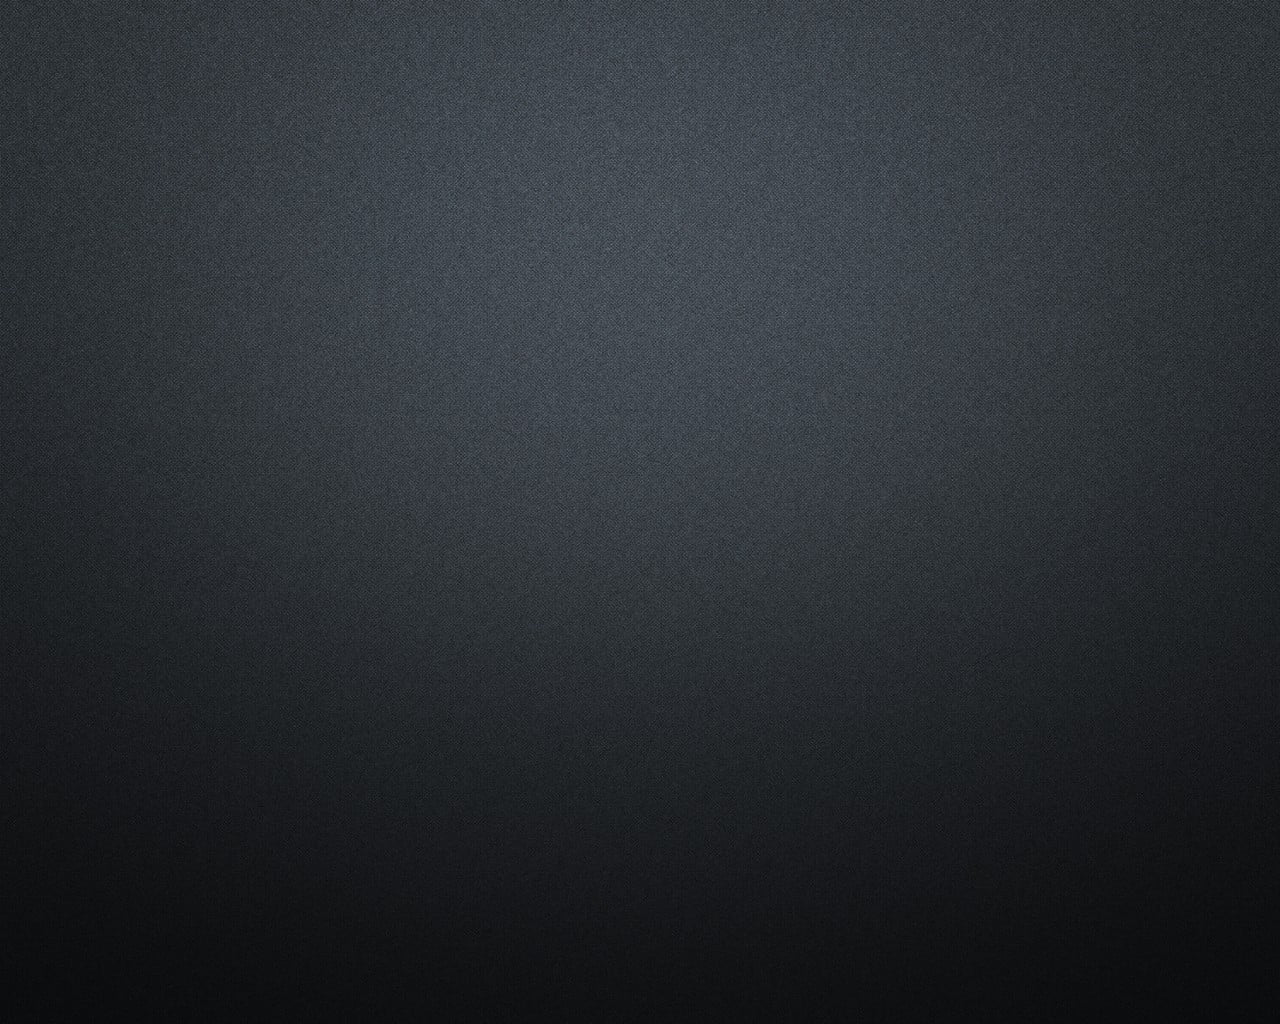 simple background, backgrounds, gray, black color, textured